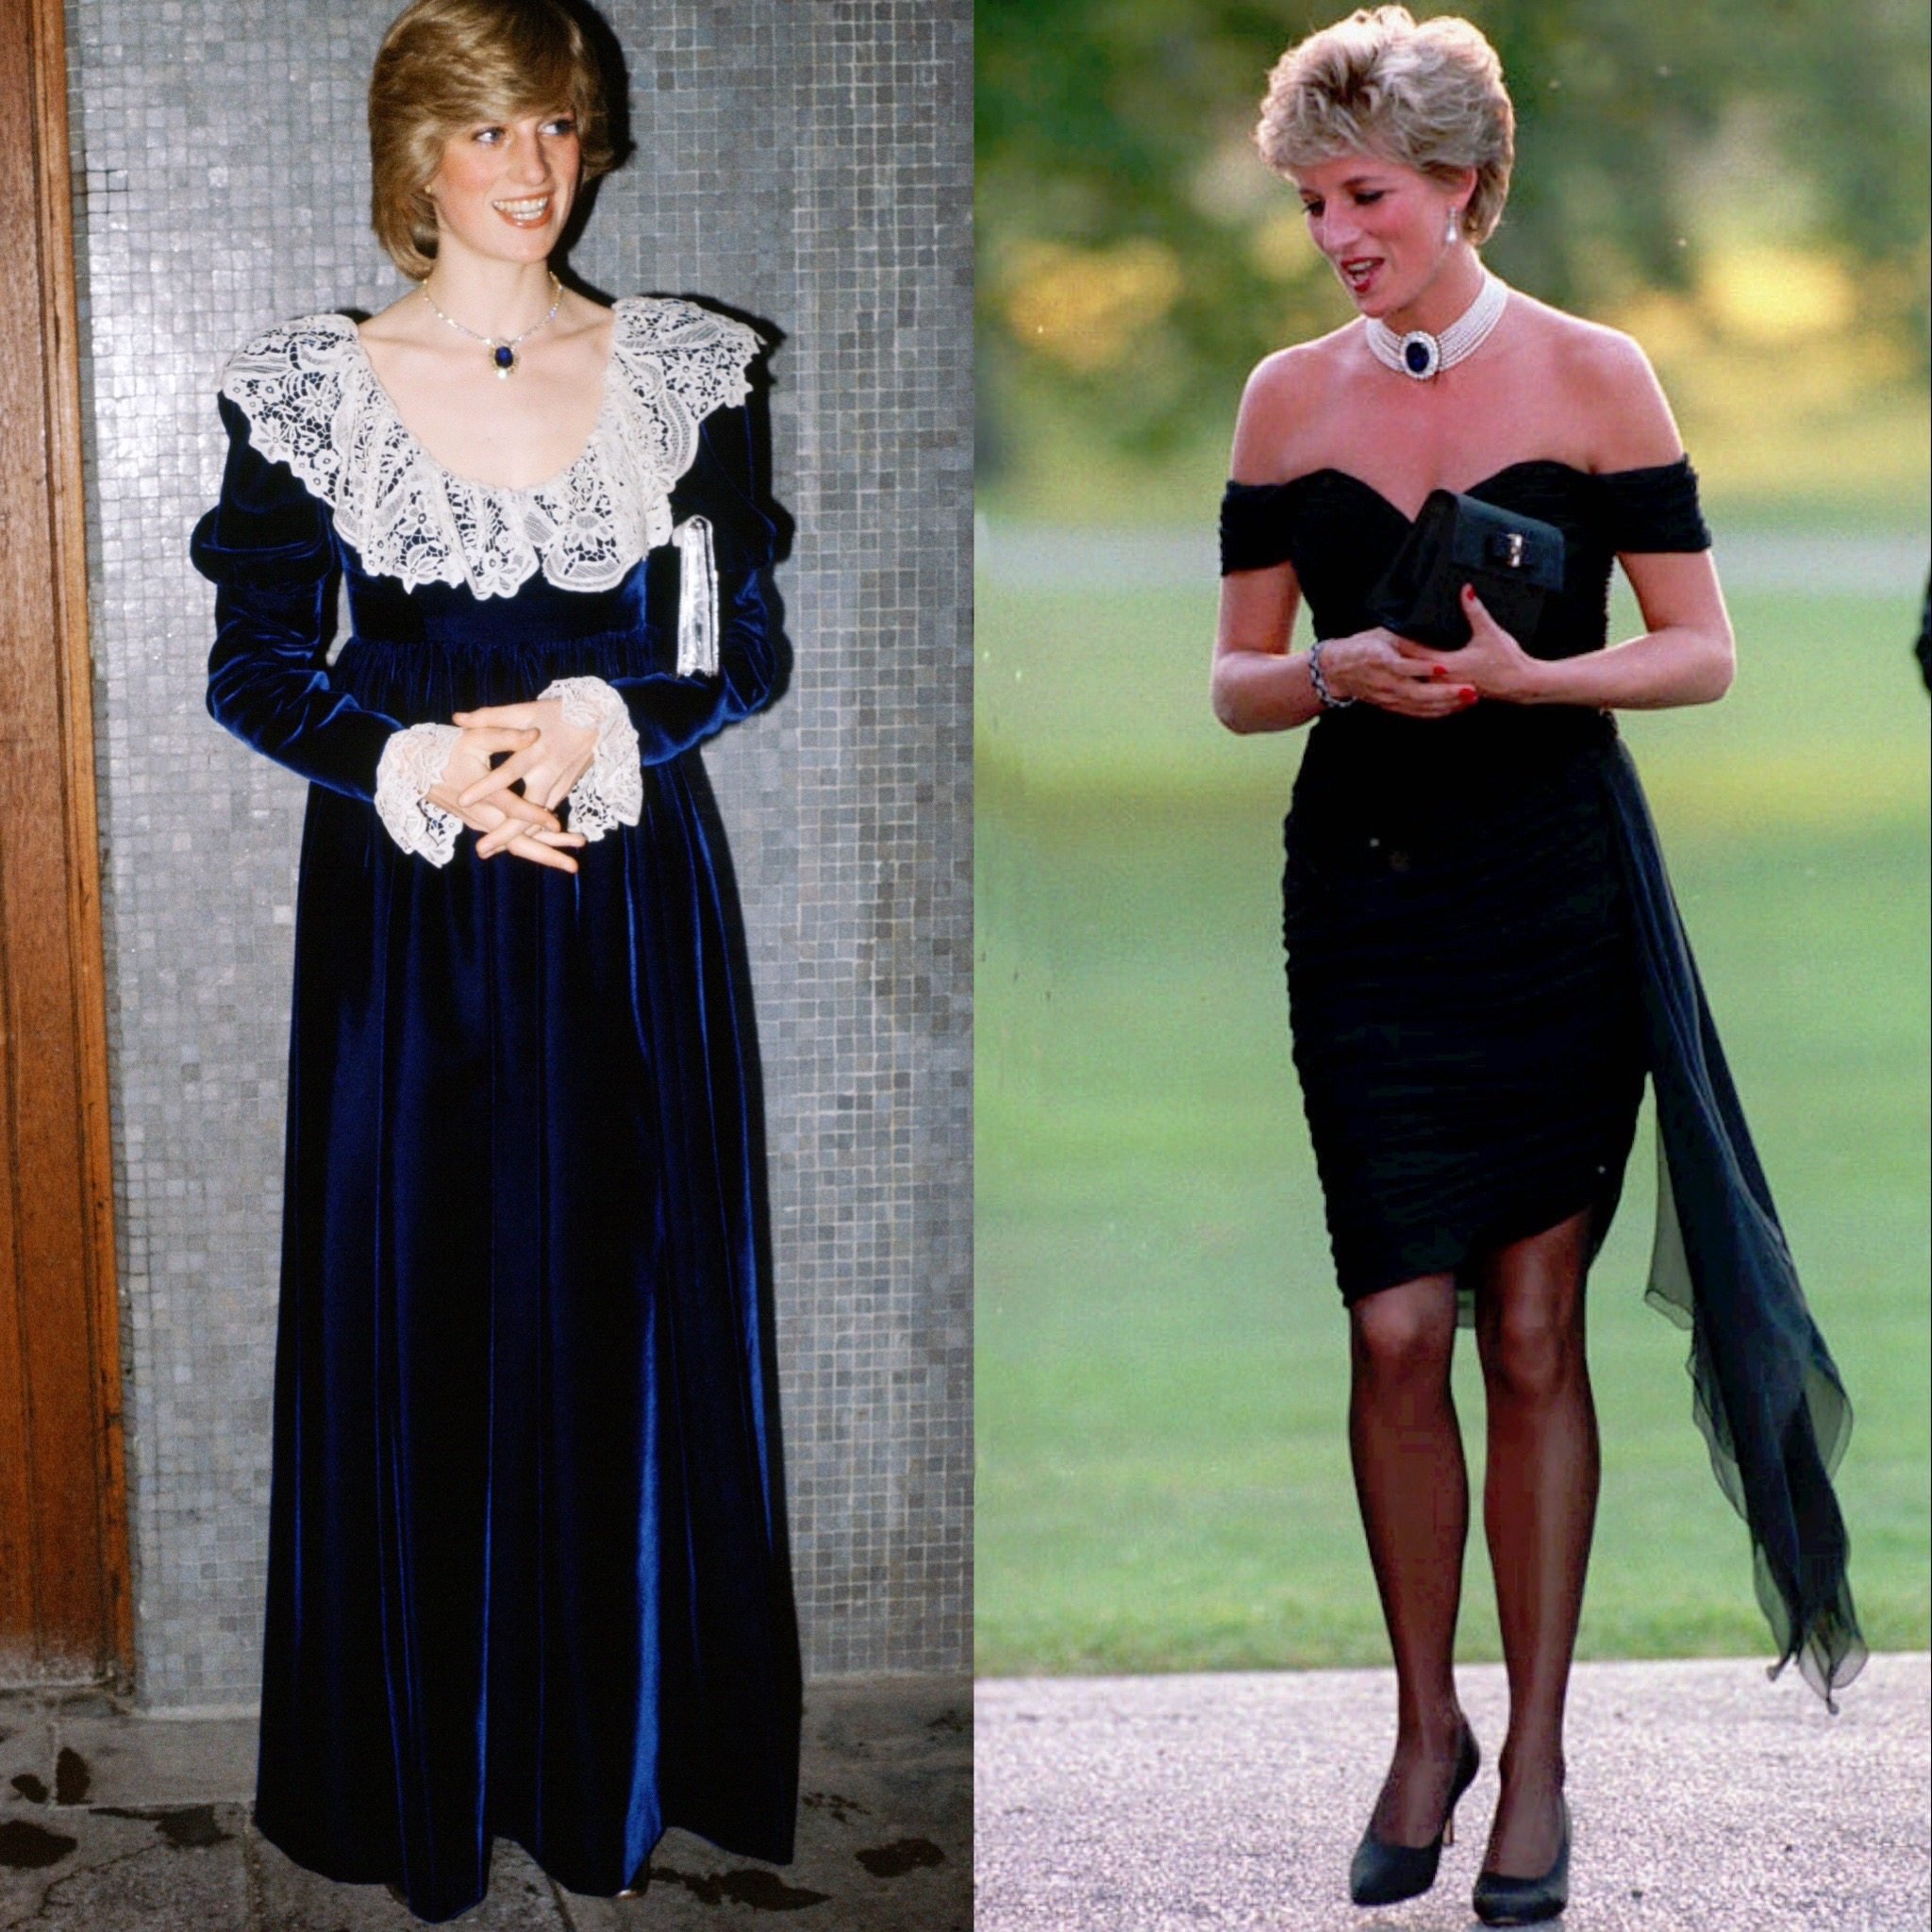 Princess Diana’s style took a major turn after she divorced Charles. In 1994 she made headlines with the “revenge dress” (pictured left), which she wore at a party in London. Photos: Tim Graham Photo Library via Getty Images and Martin Keene, AP.


